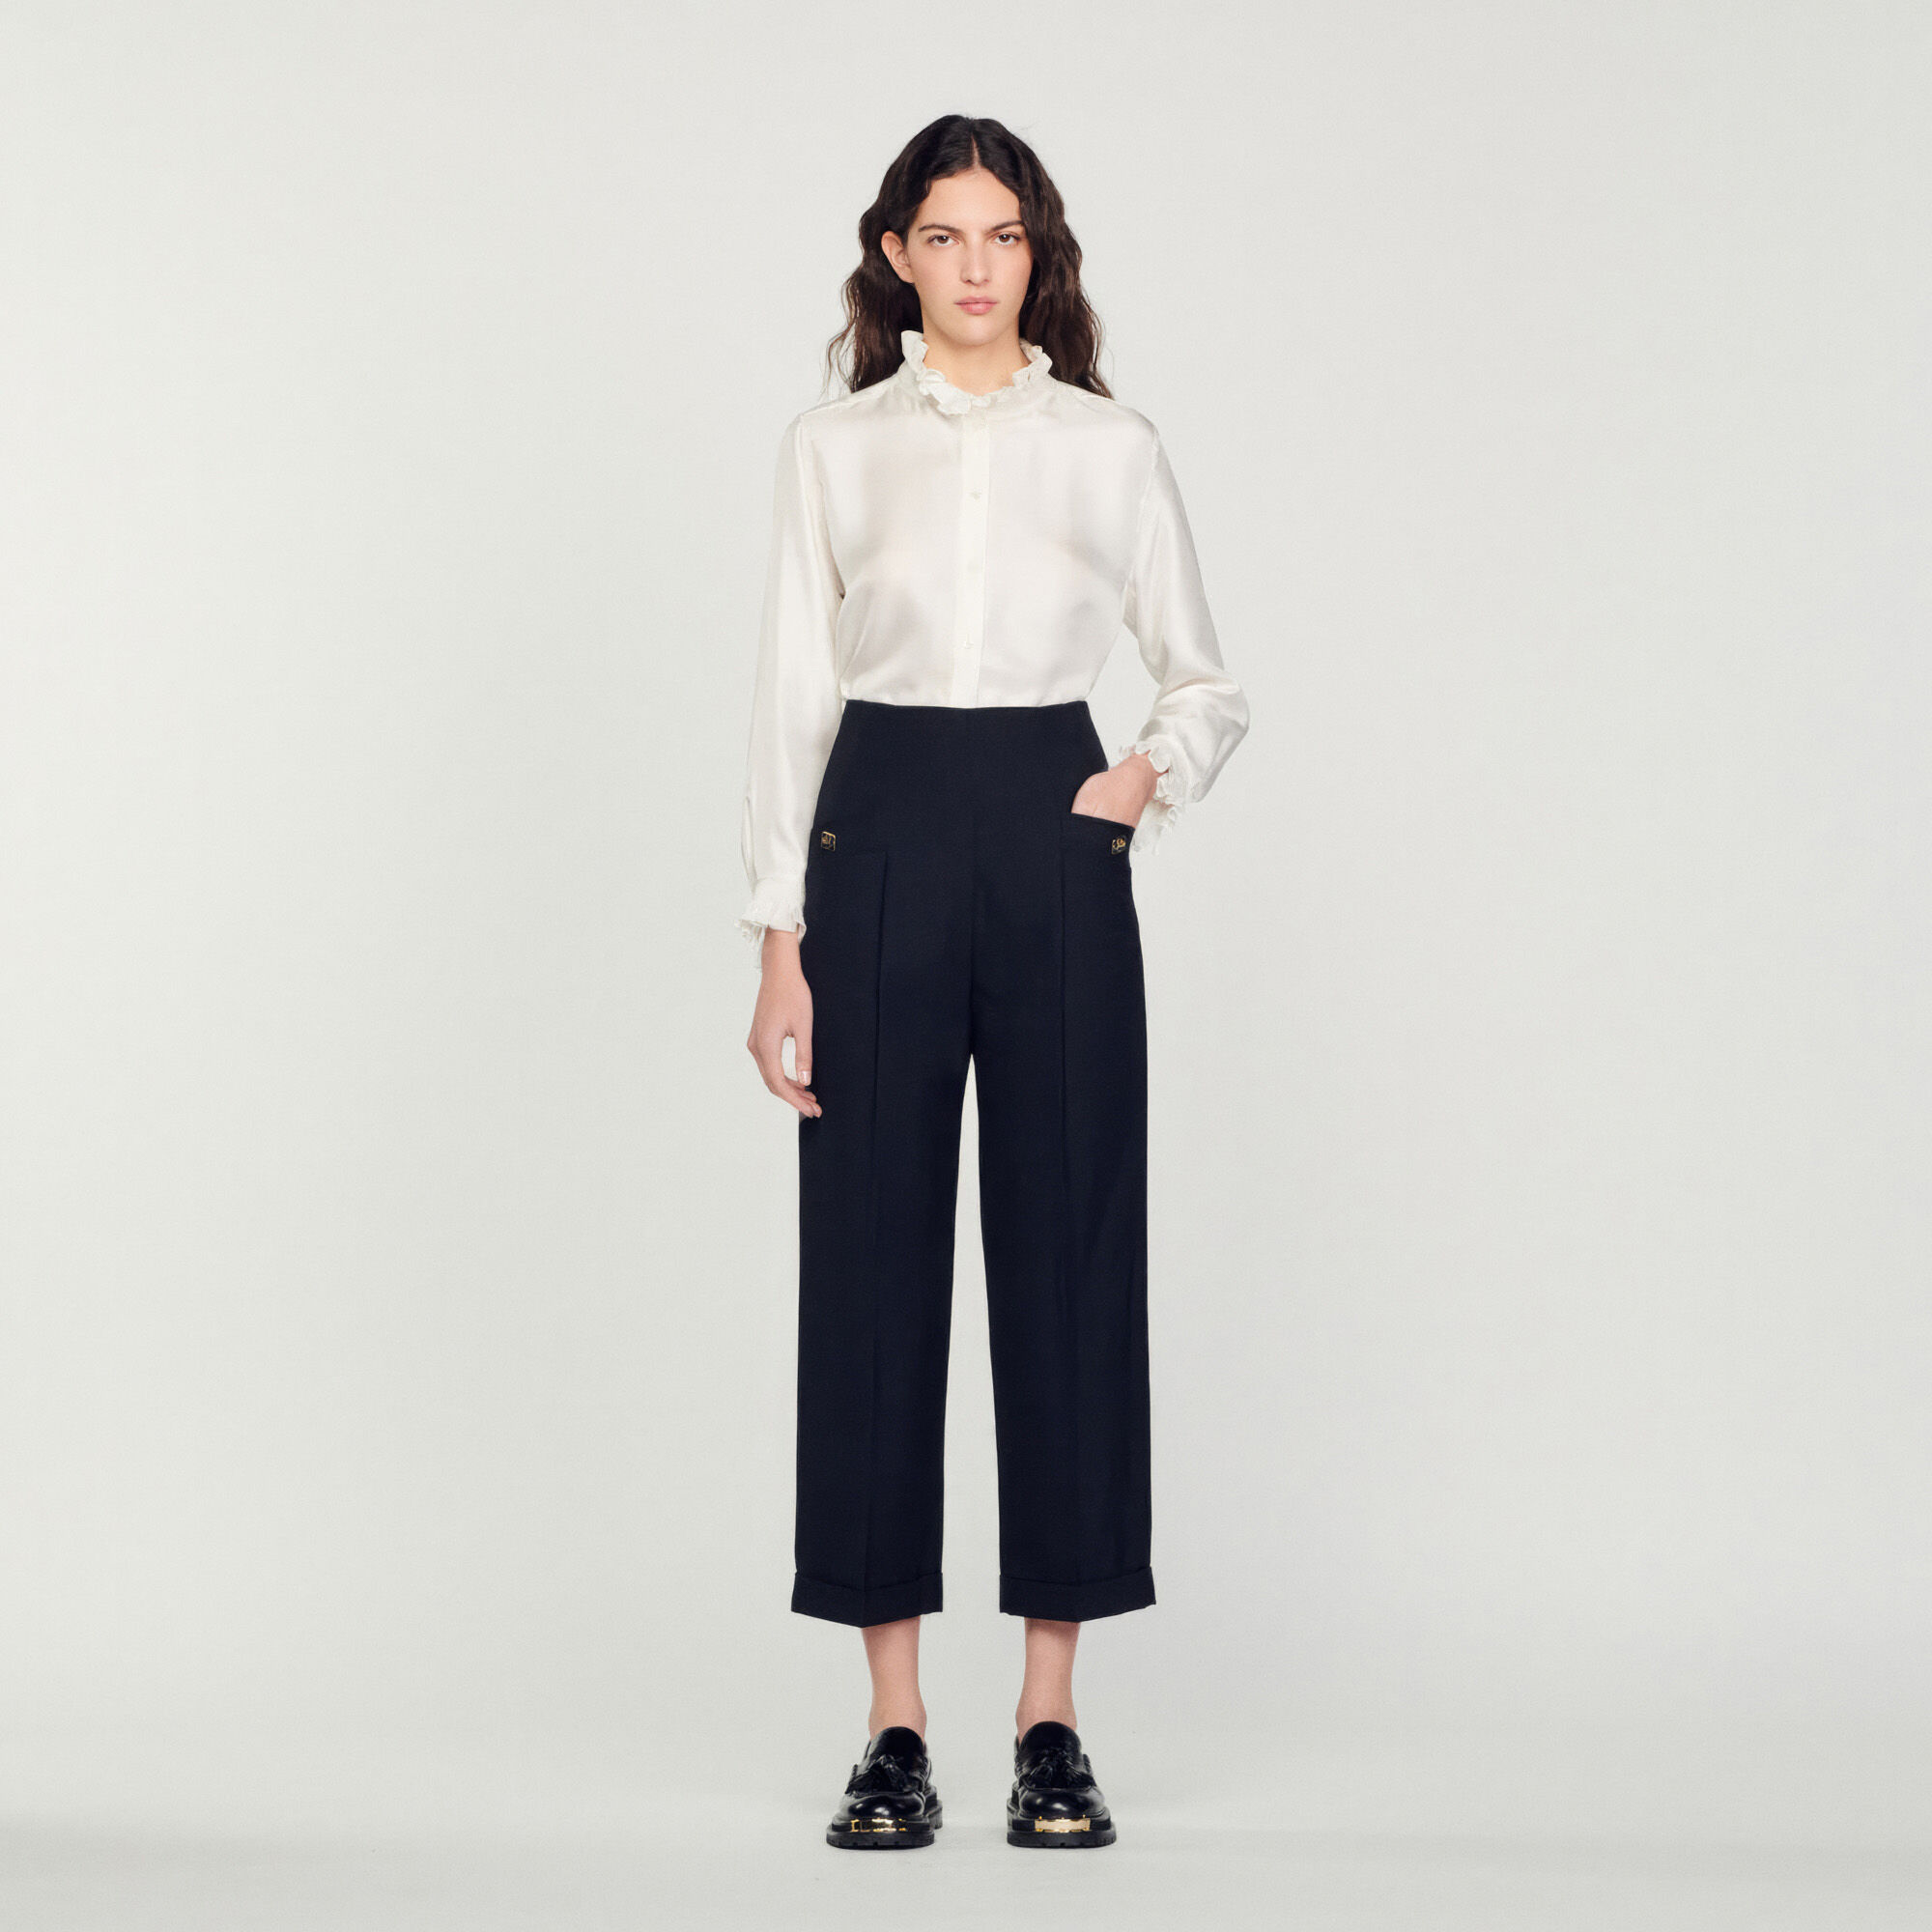 Tailor To You Belted High Waisted Trousers  Oh Polly UK